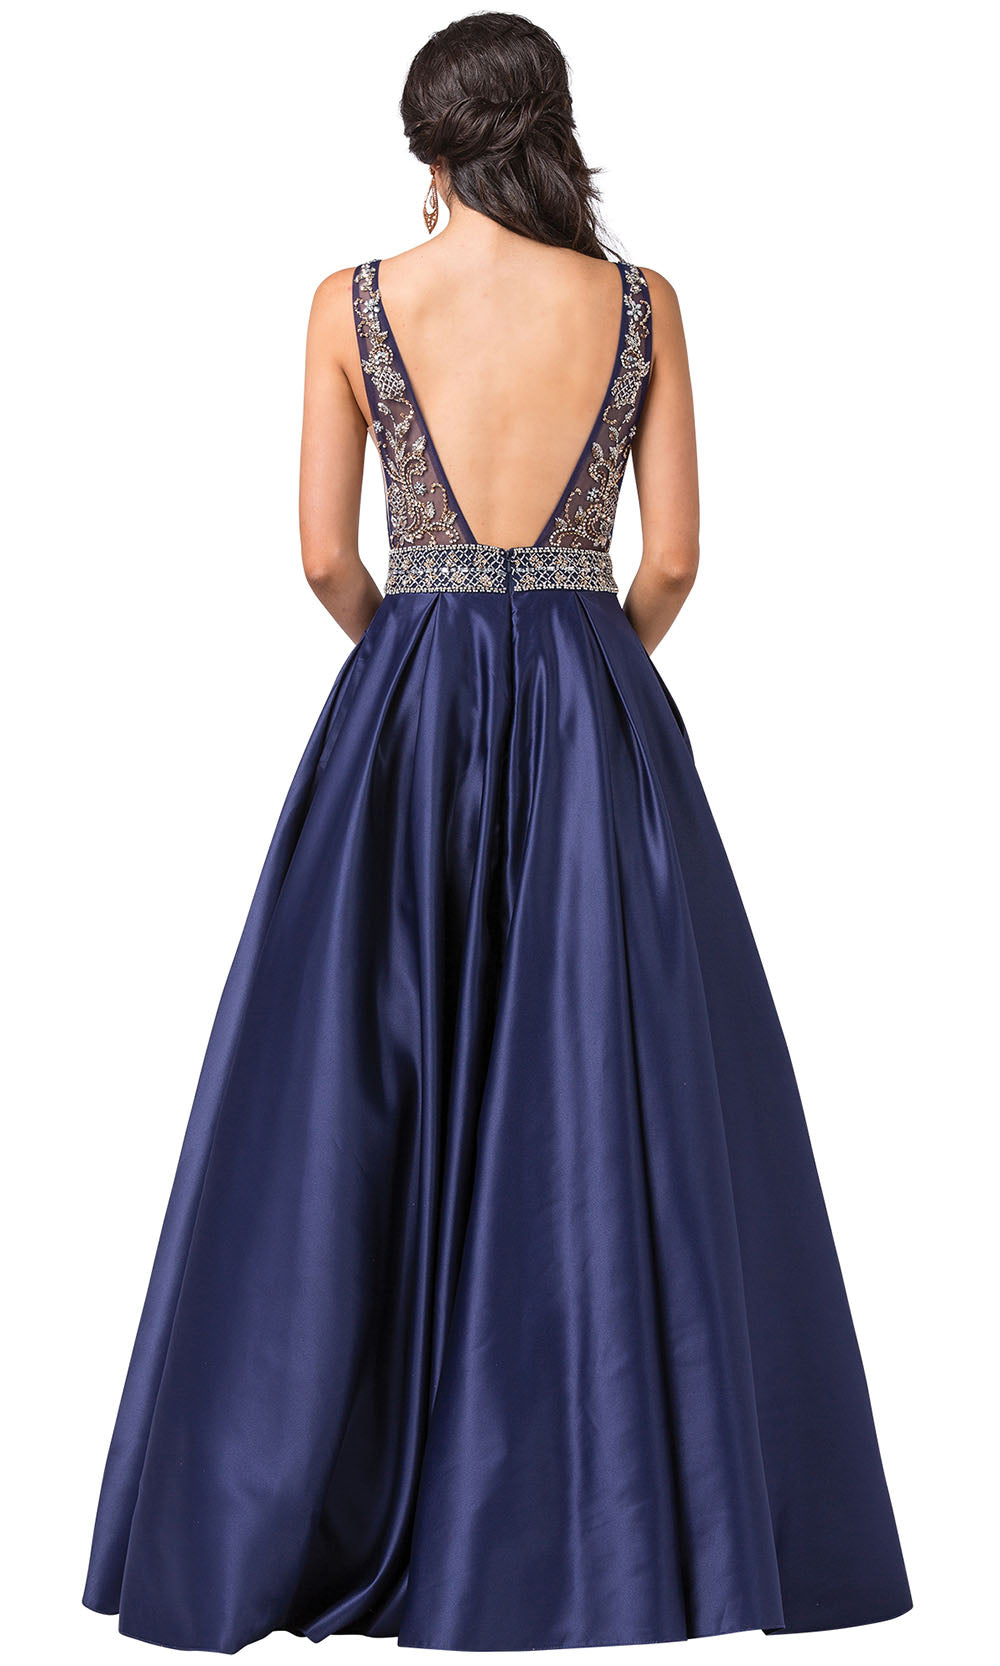 Dancing Queen - 2512 Beaded Ladder Strap Plunging Dress In Blue